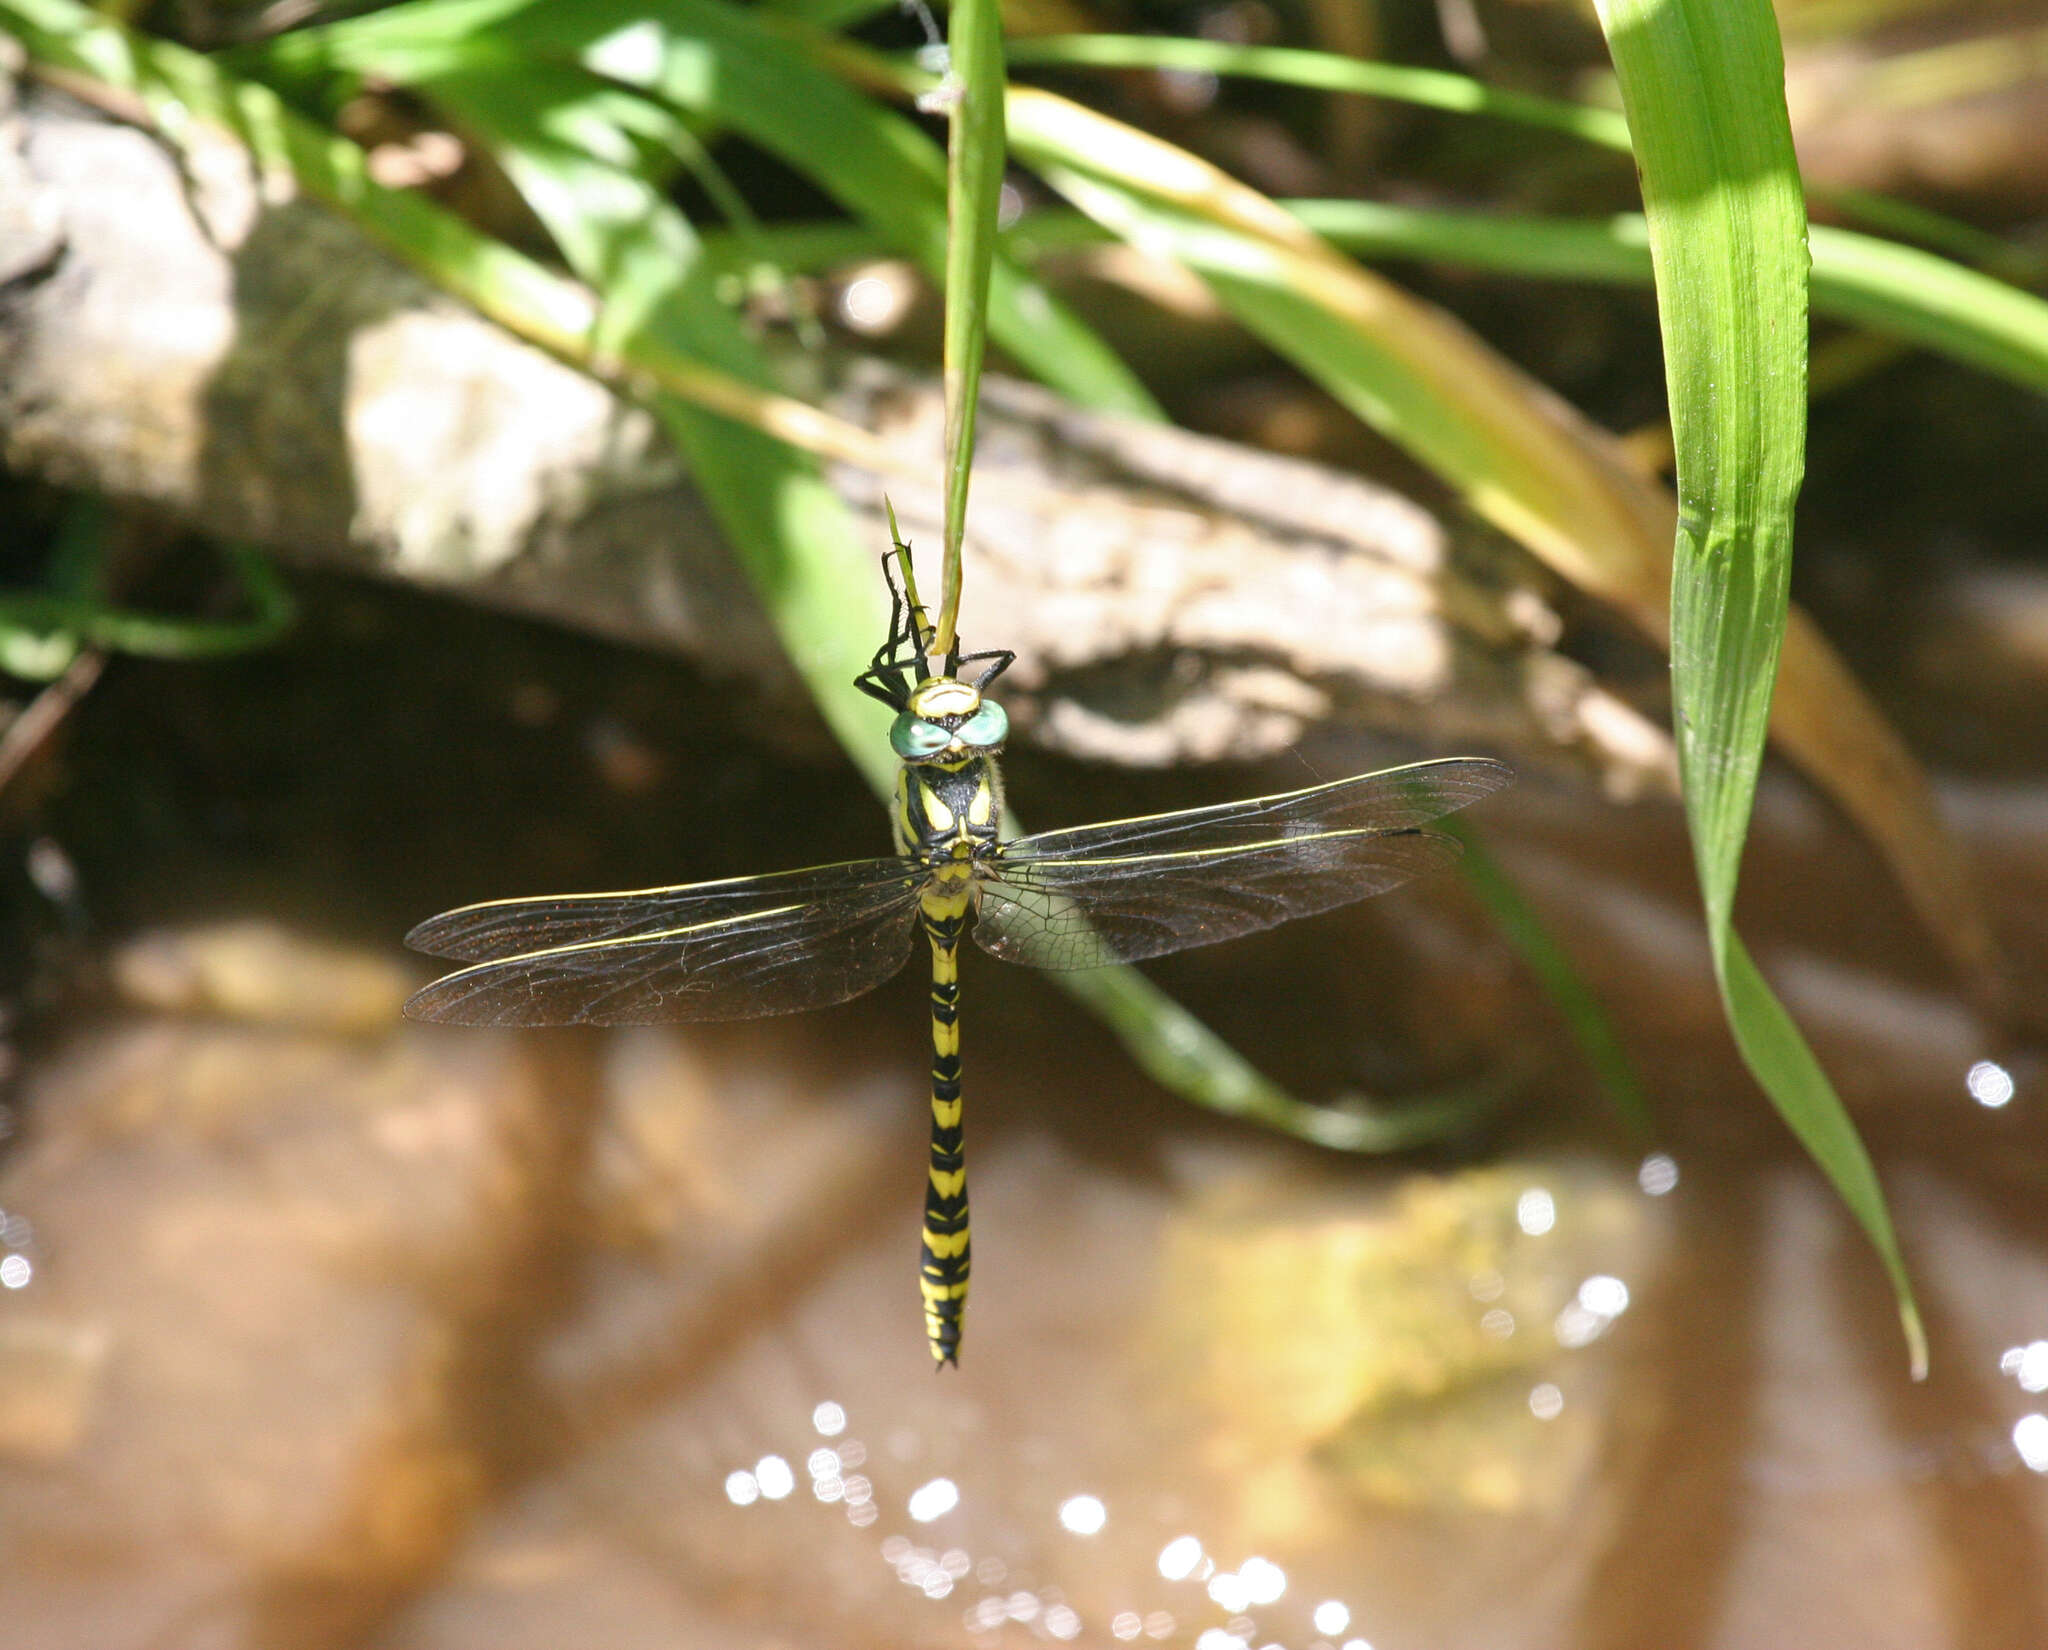 Image of spiketail